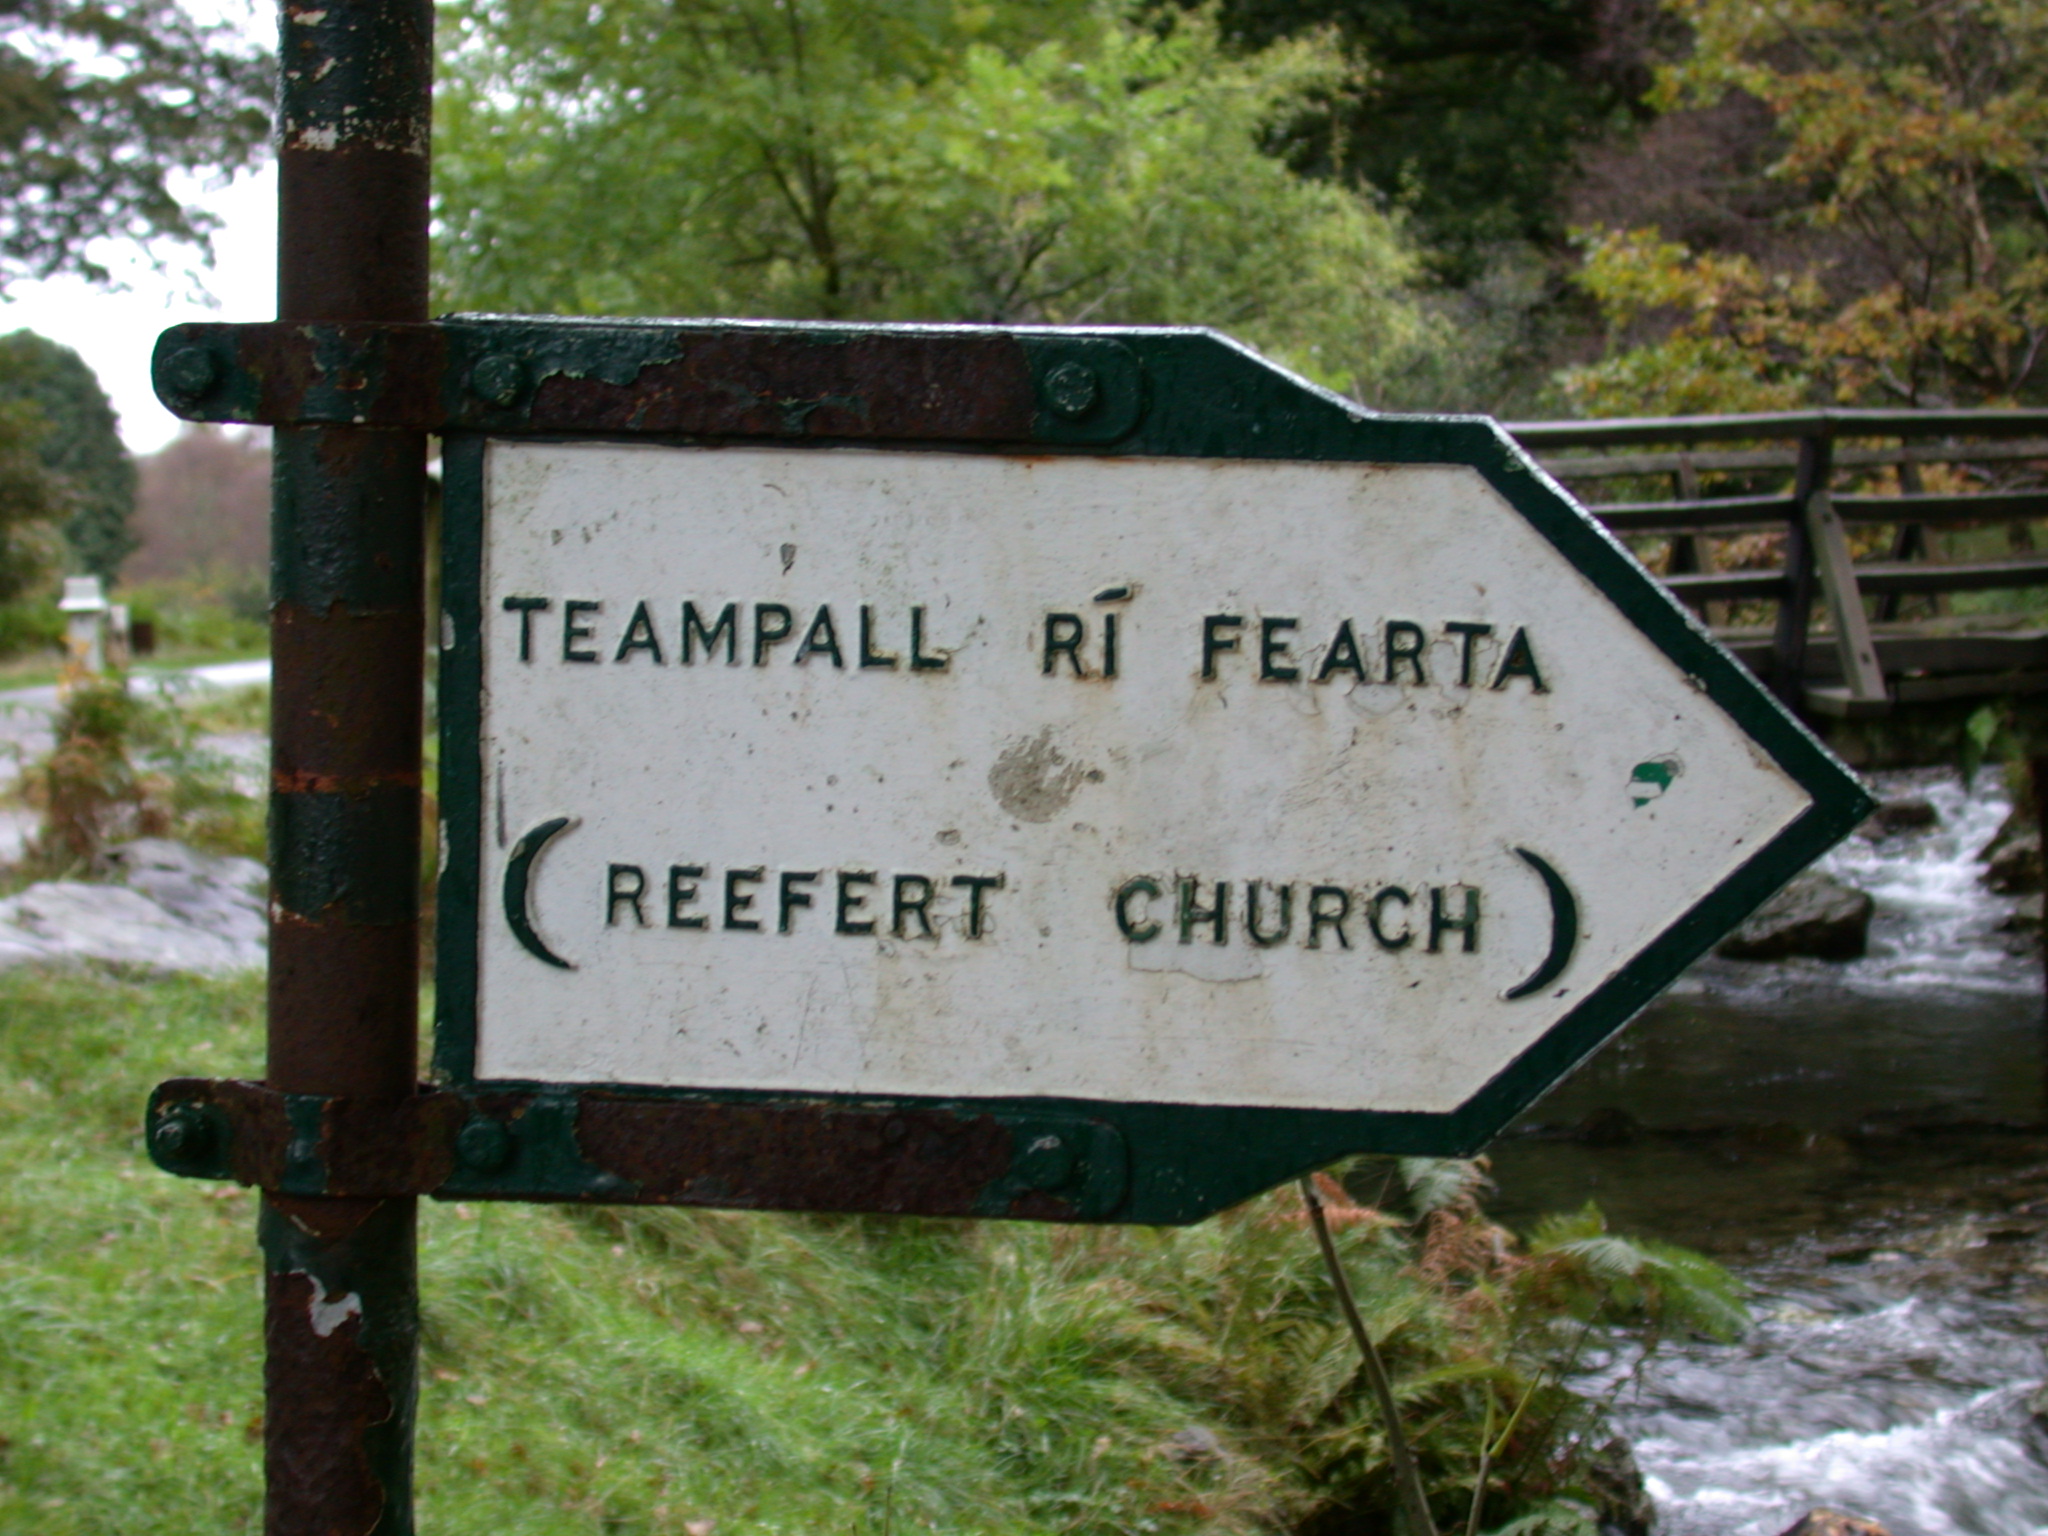 road sign roadsign pointing direction directions church reefer black and white teampall ri fearta brook stream country countryside country-side